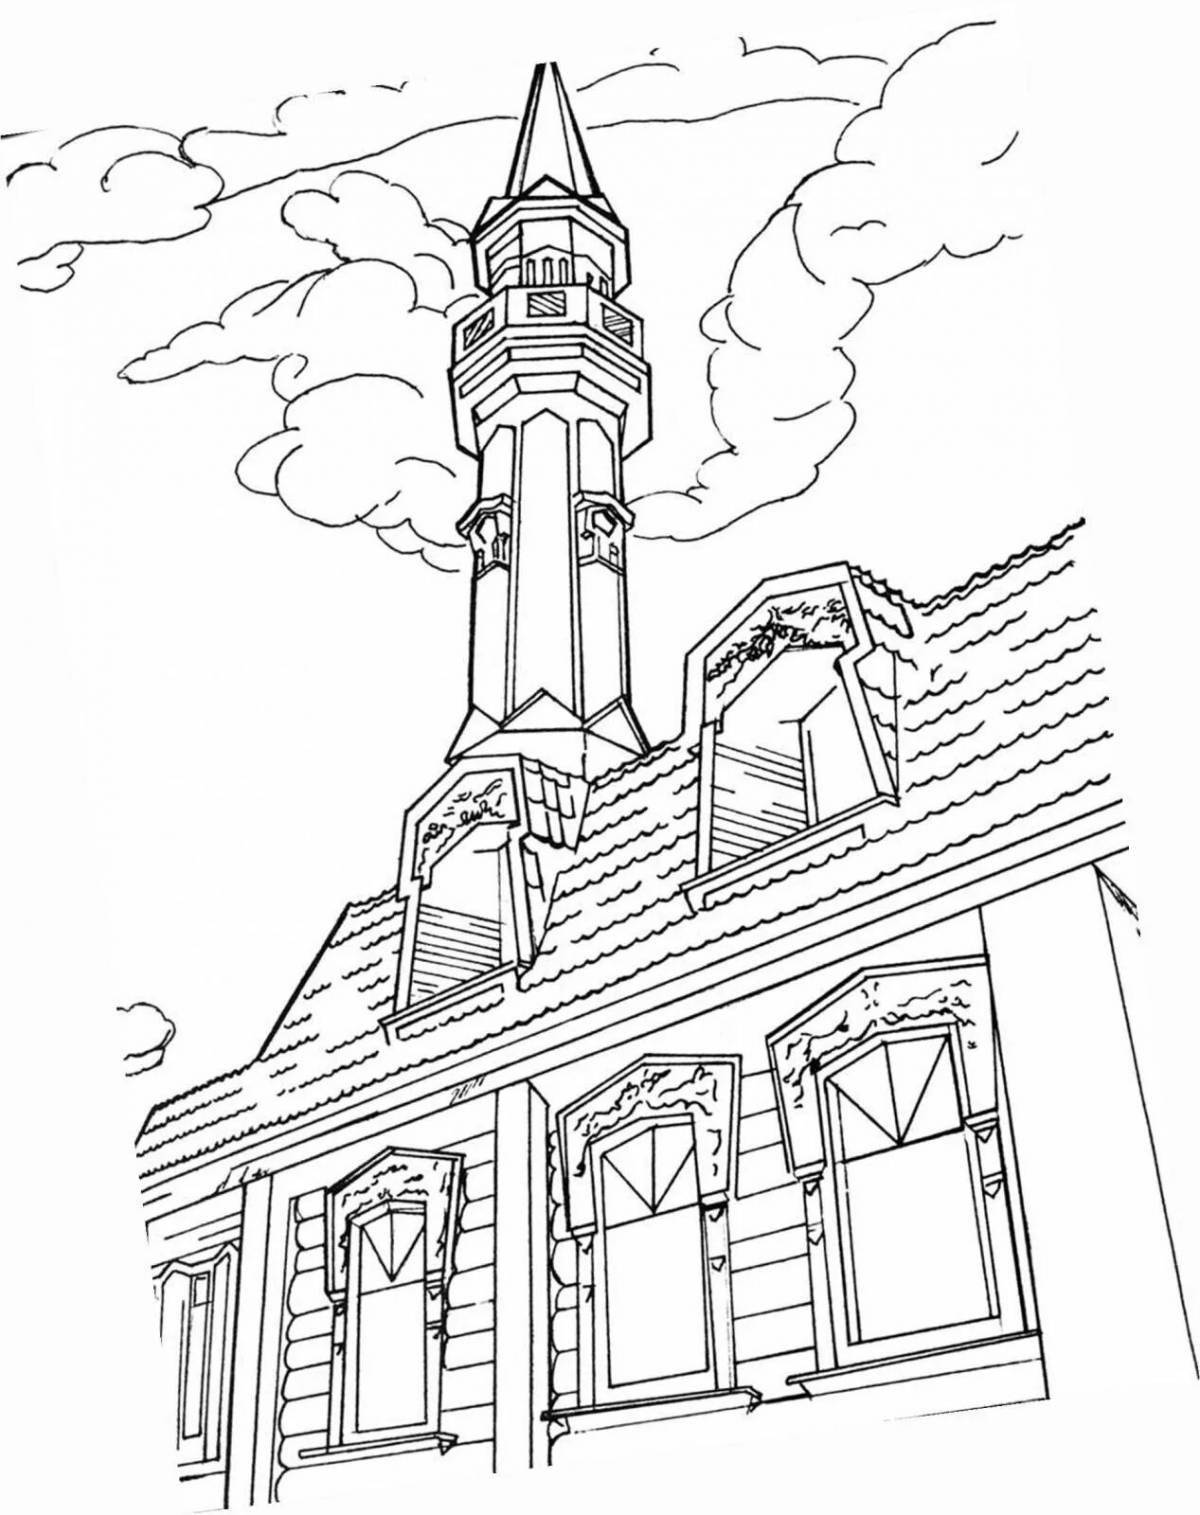 Amazing coloring pages sights of Ulyanovsk